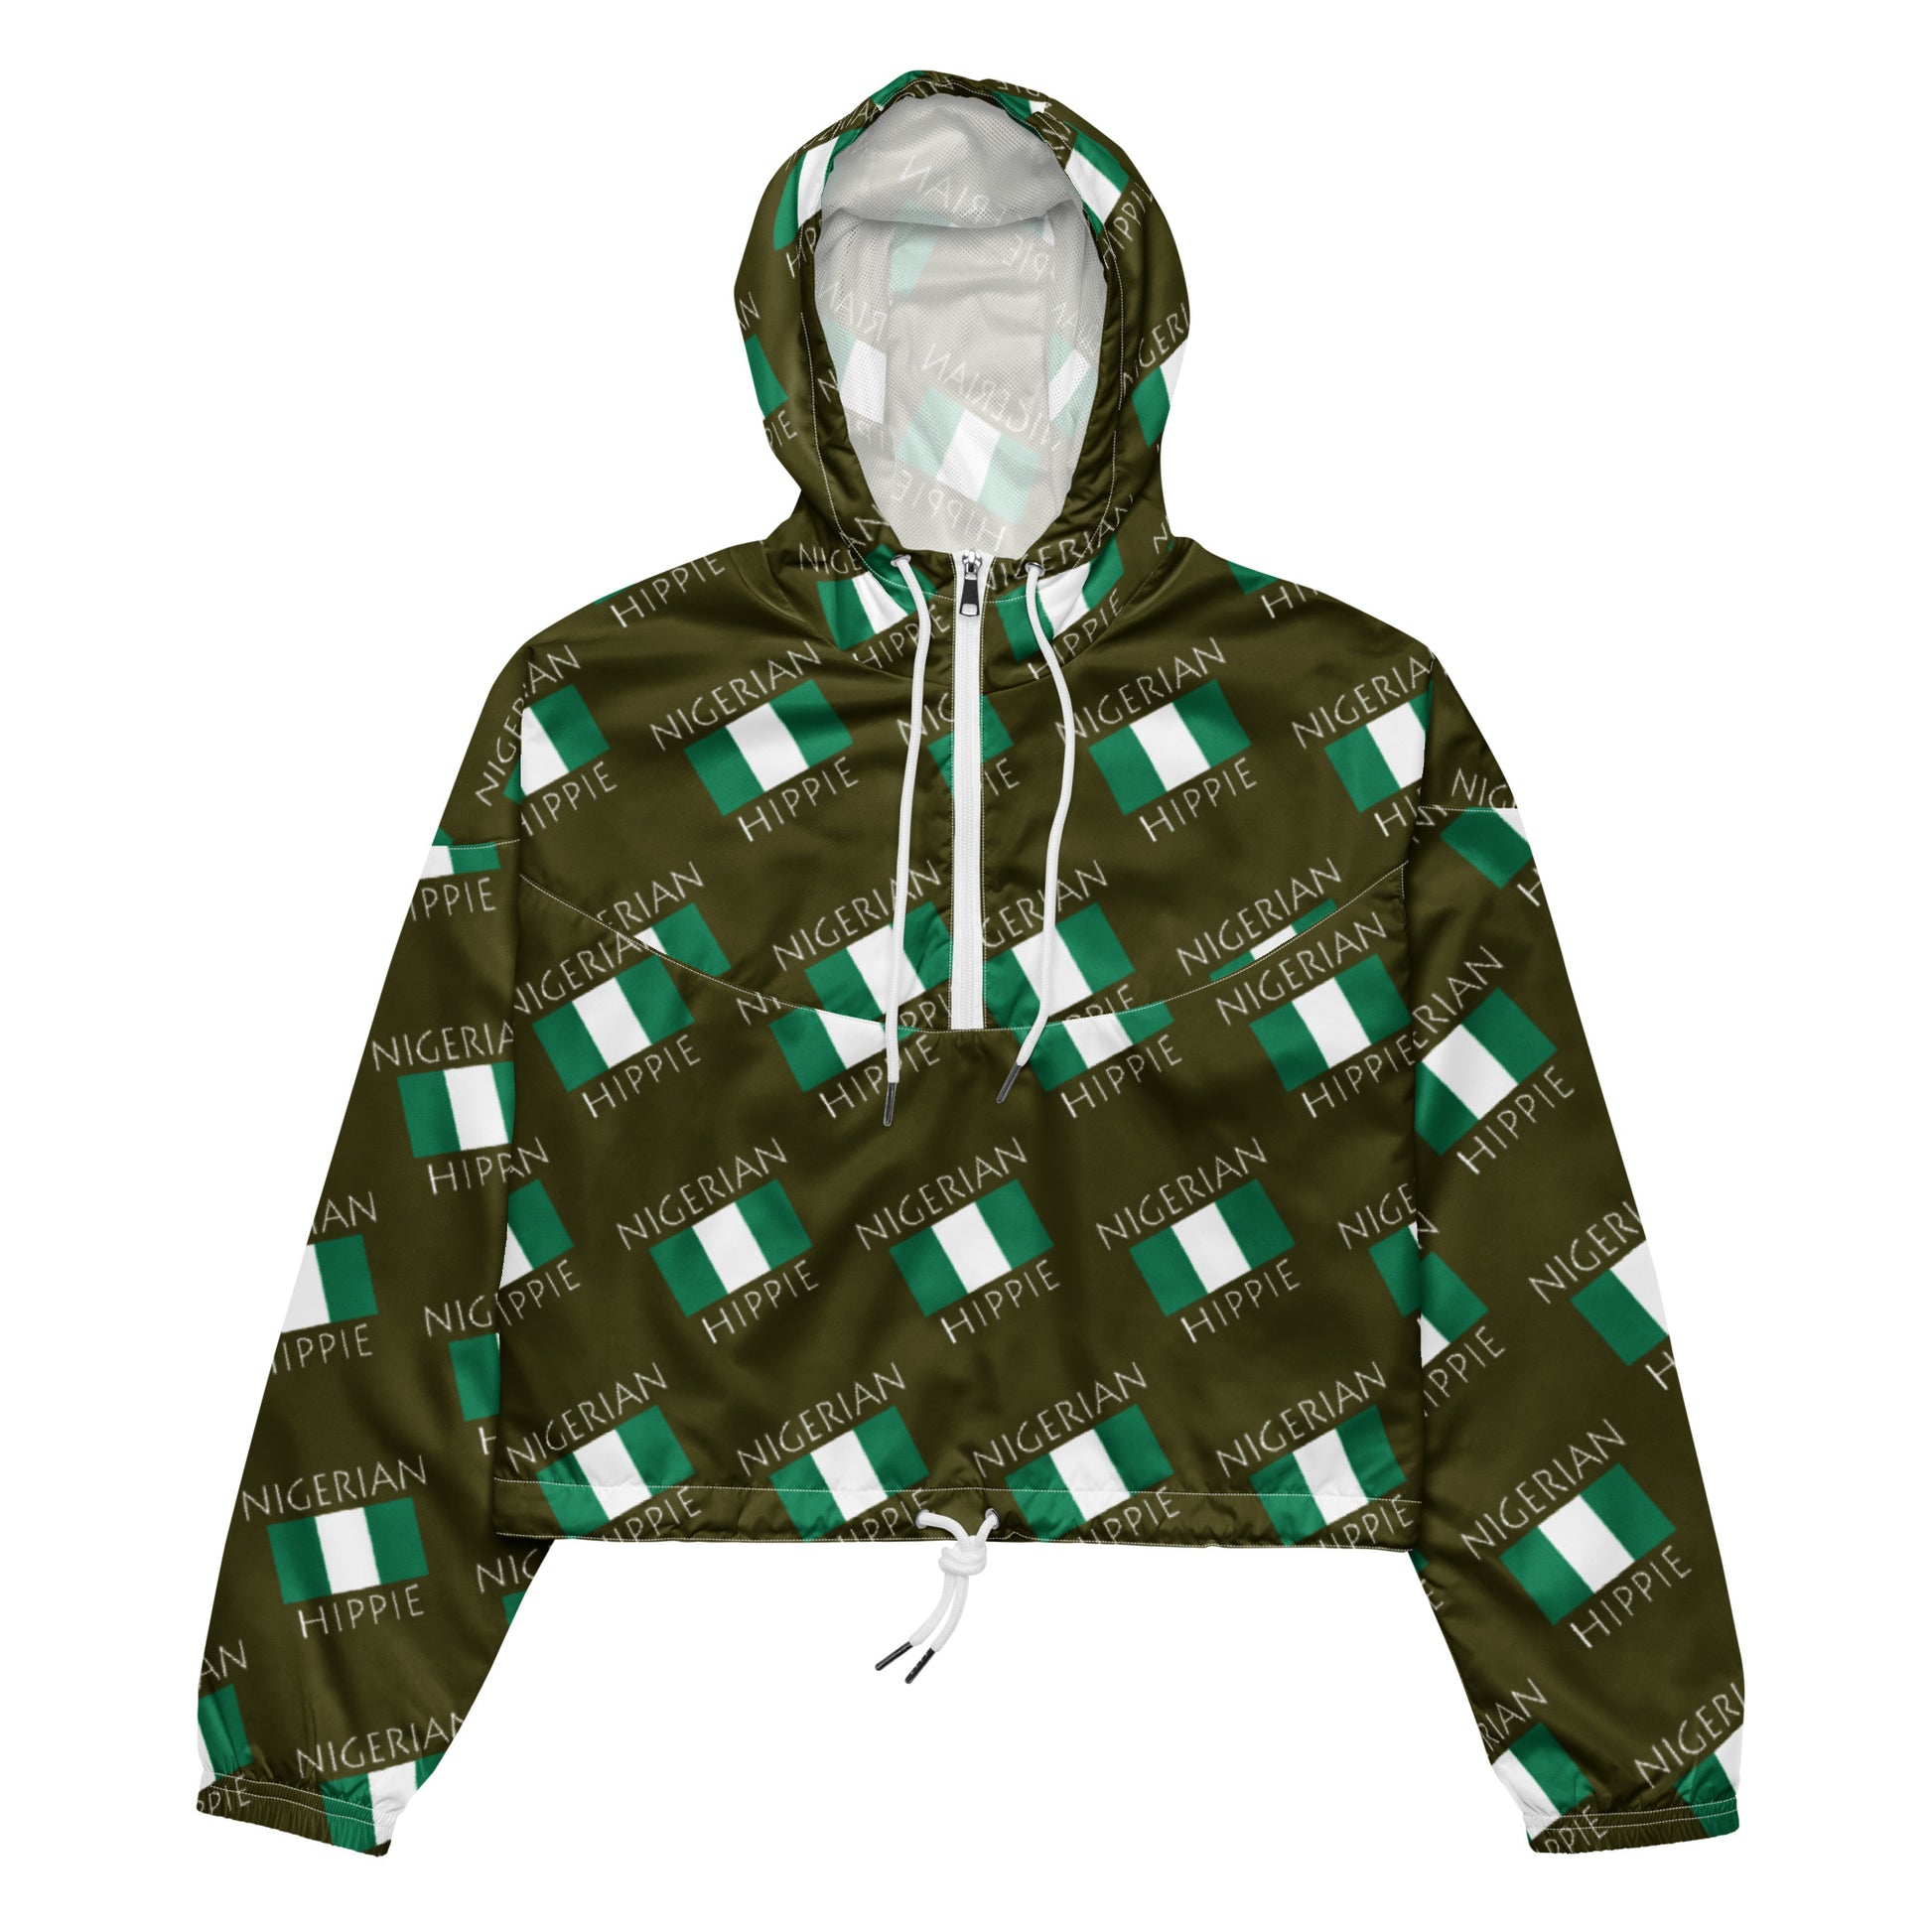 Your Nigerian Flag Hippie cropped hoodie half zip is a fashion statement...and super practical. Lightweight, waterproof and ready for any adventure and you will look fantastic with our repeating flag hippie design. Includes side-slit pockets, breathable mesh lining, and adjustable draw cords on the hood and waist to support all your stylish outdoor looks.